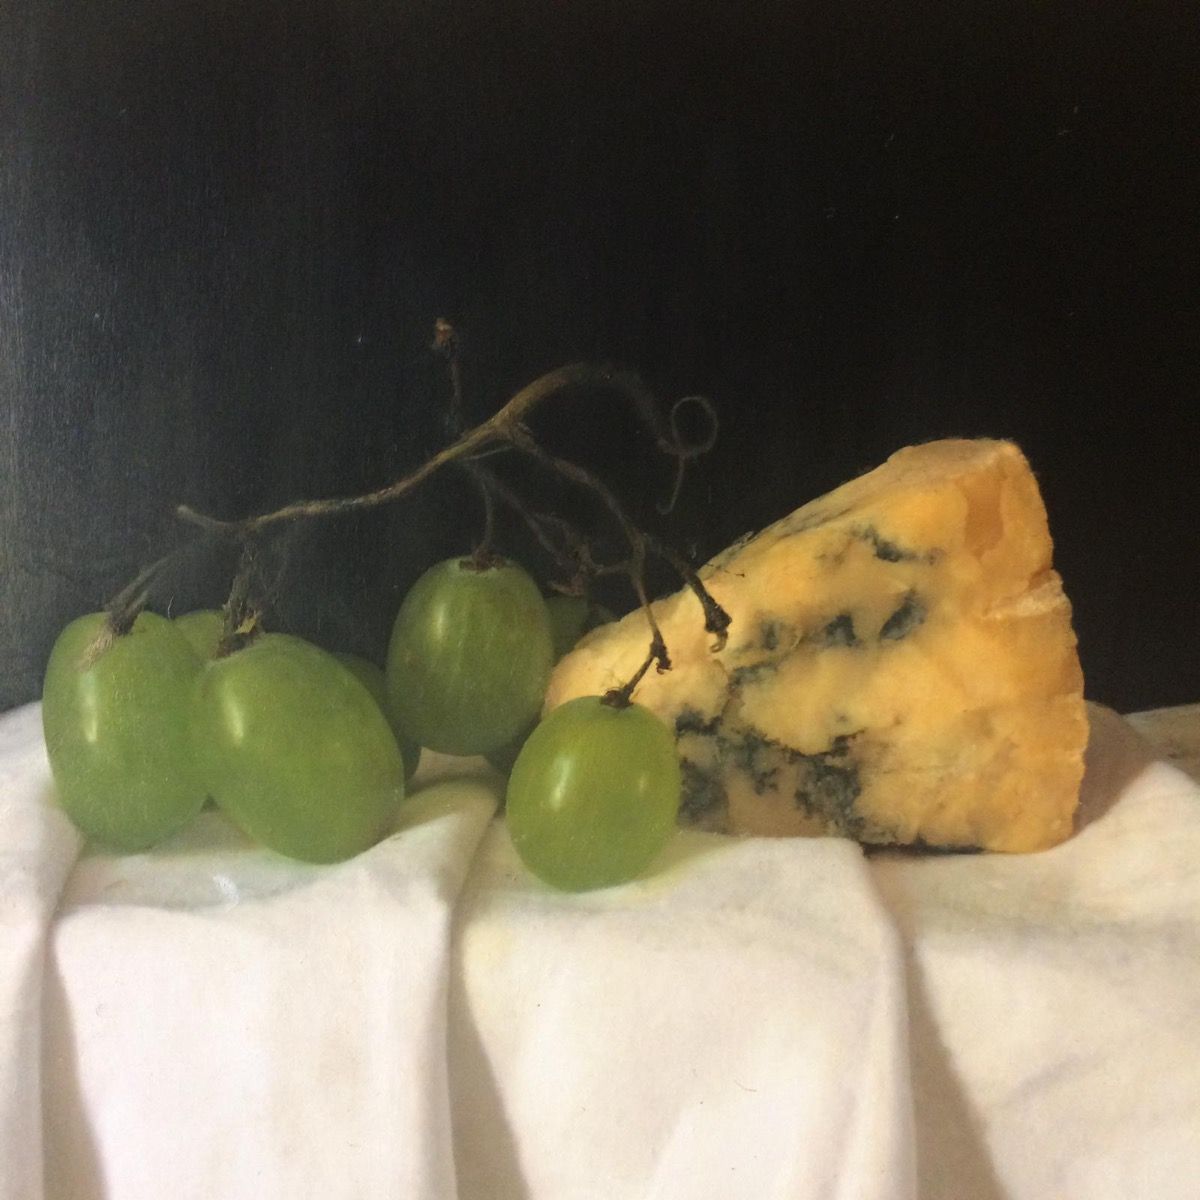 Stilton and Grapes by Kate Verrion - Secondary Image